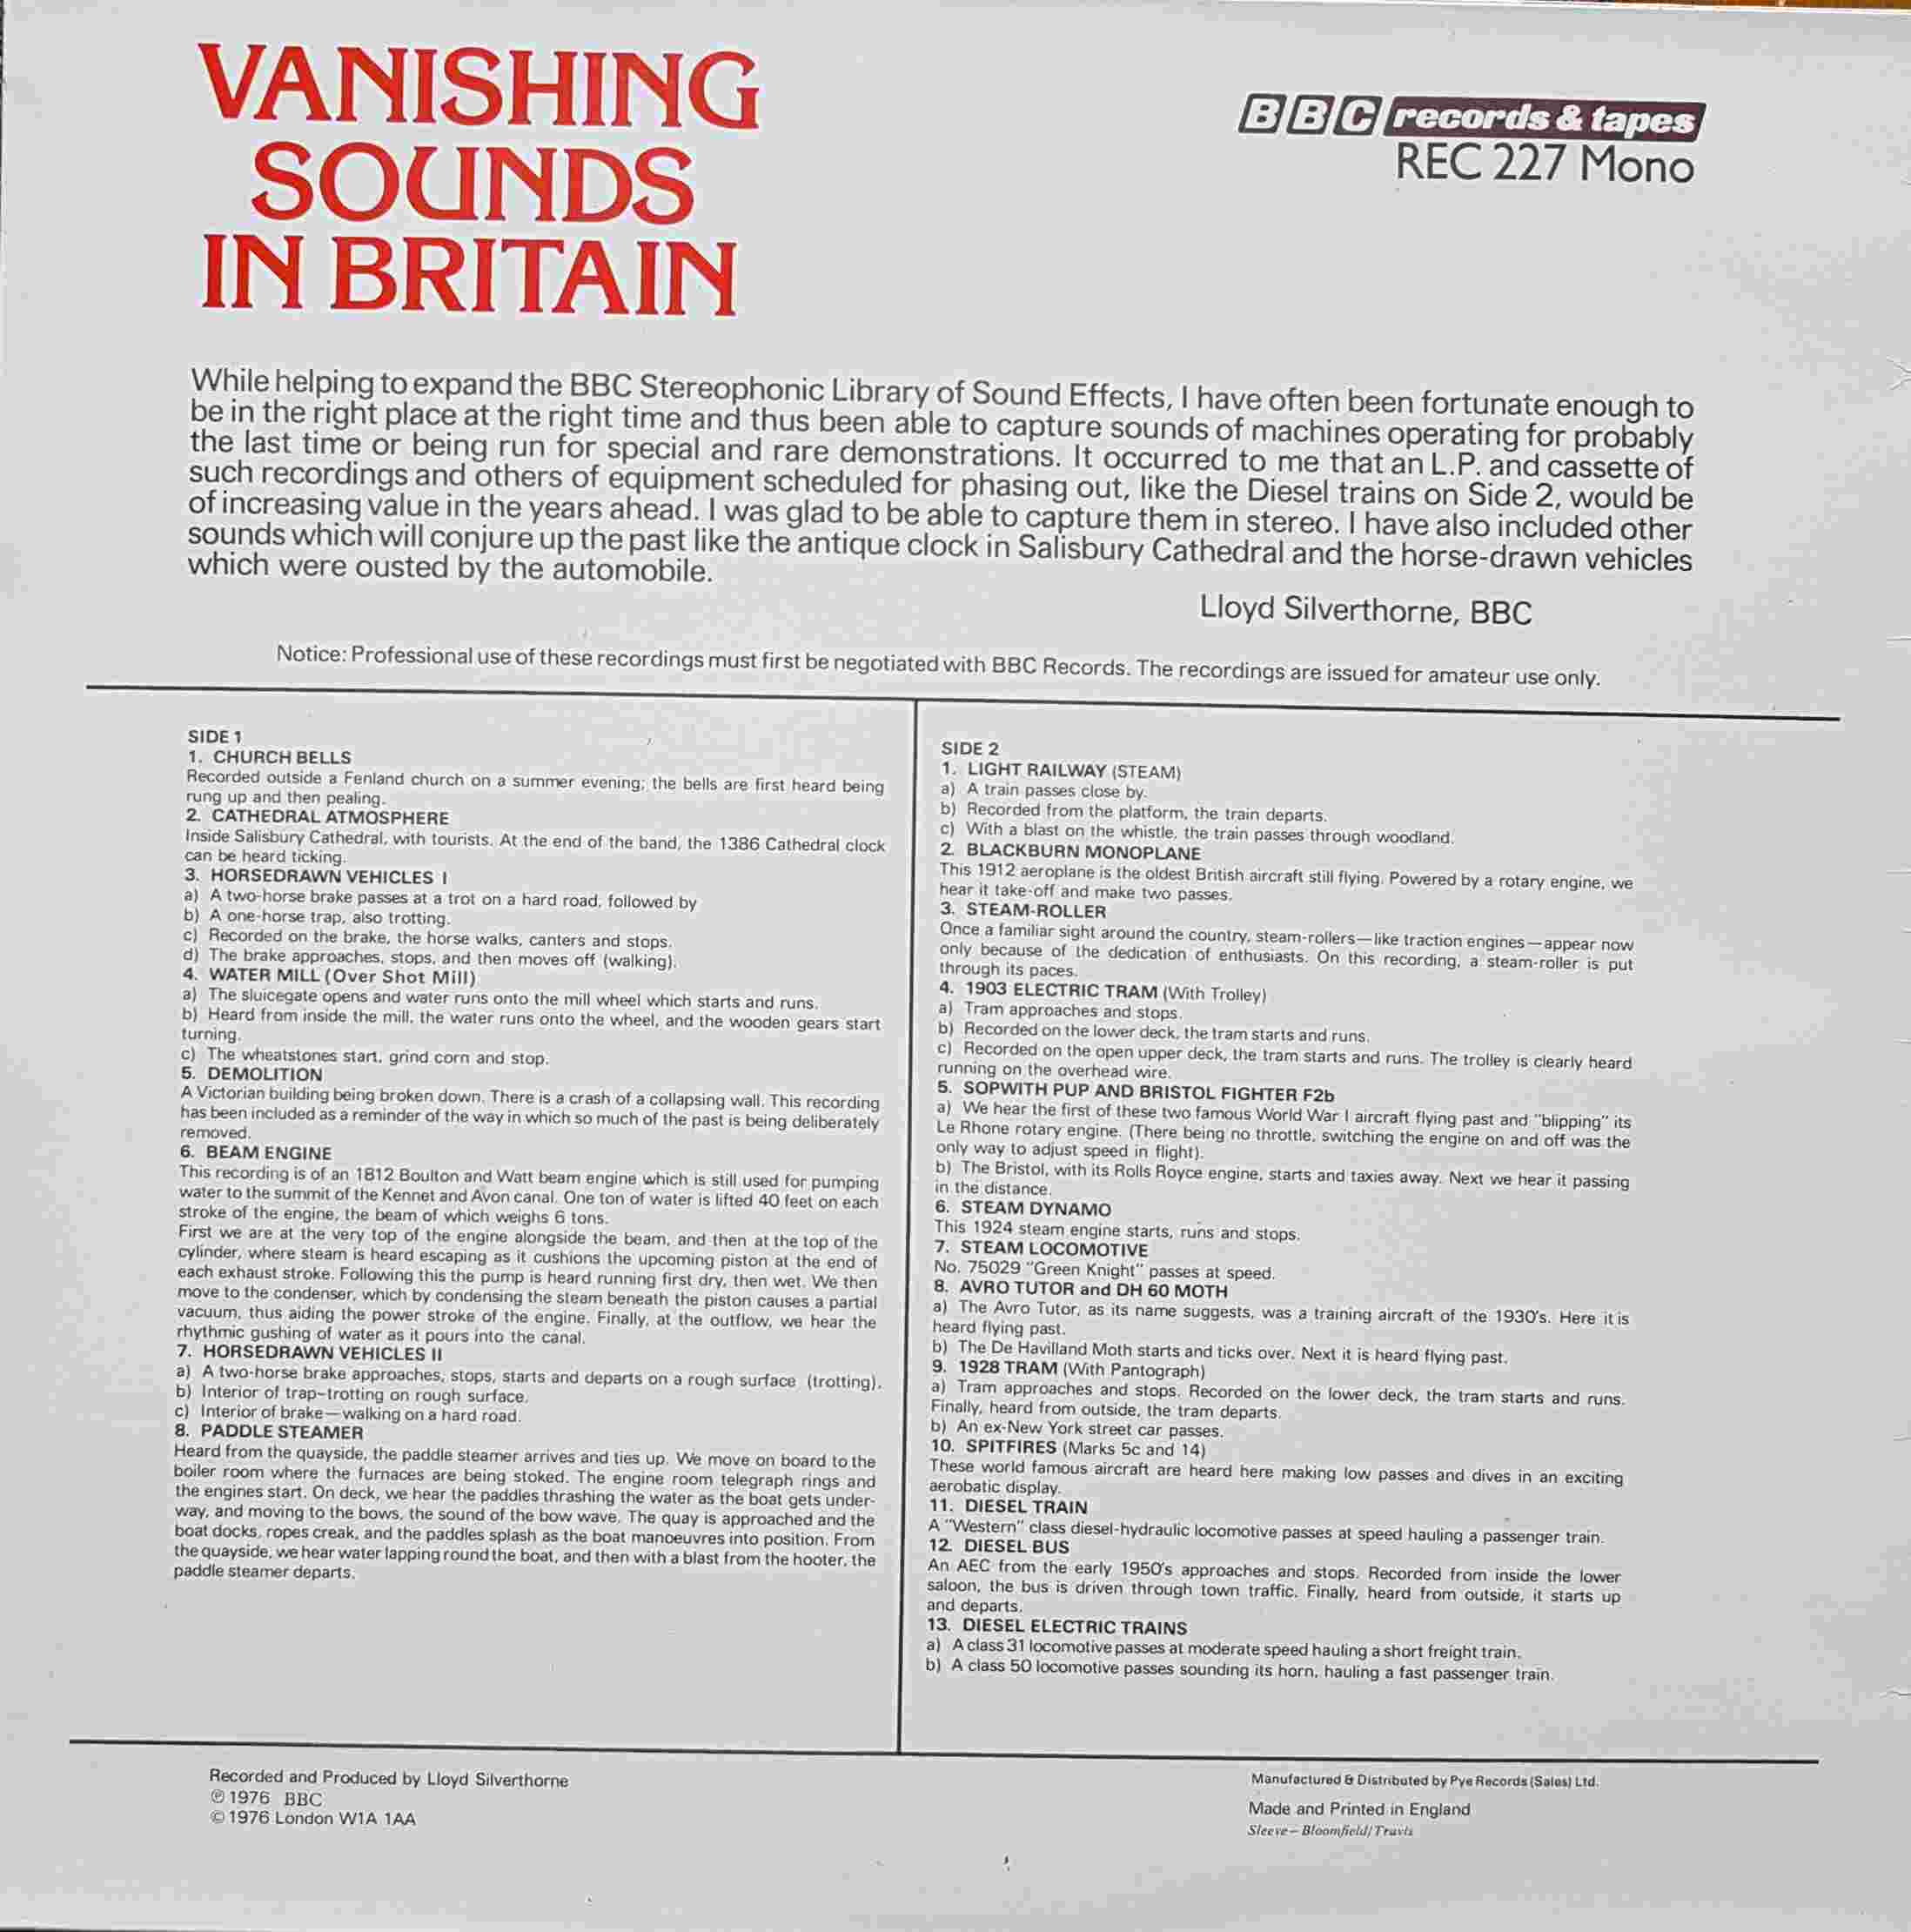 Picture of REC 227 Vanishing sounds of Britain by artist Various from the BBC records and Tapes library